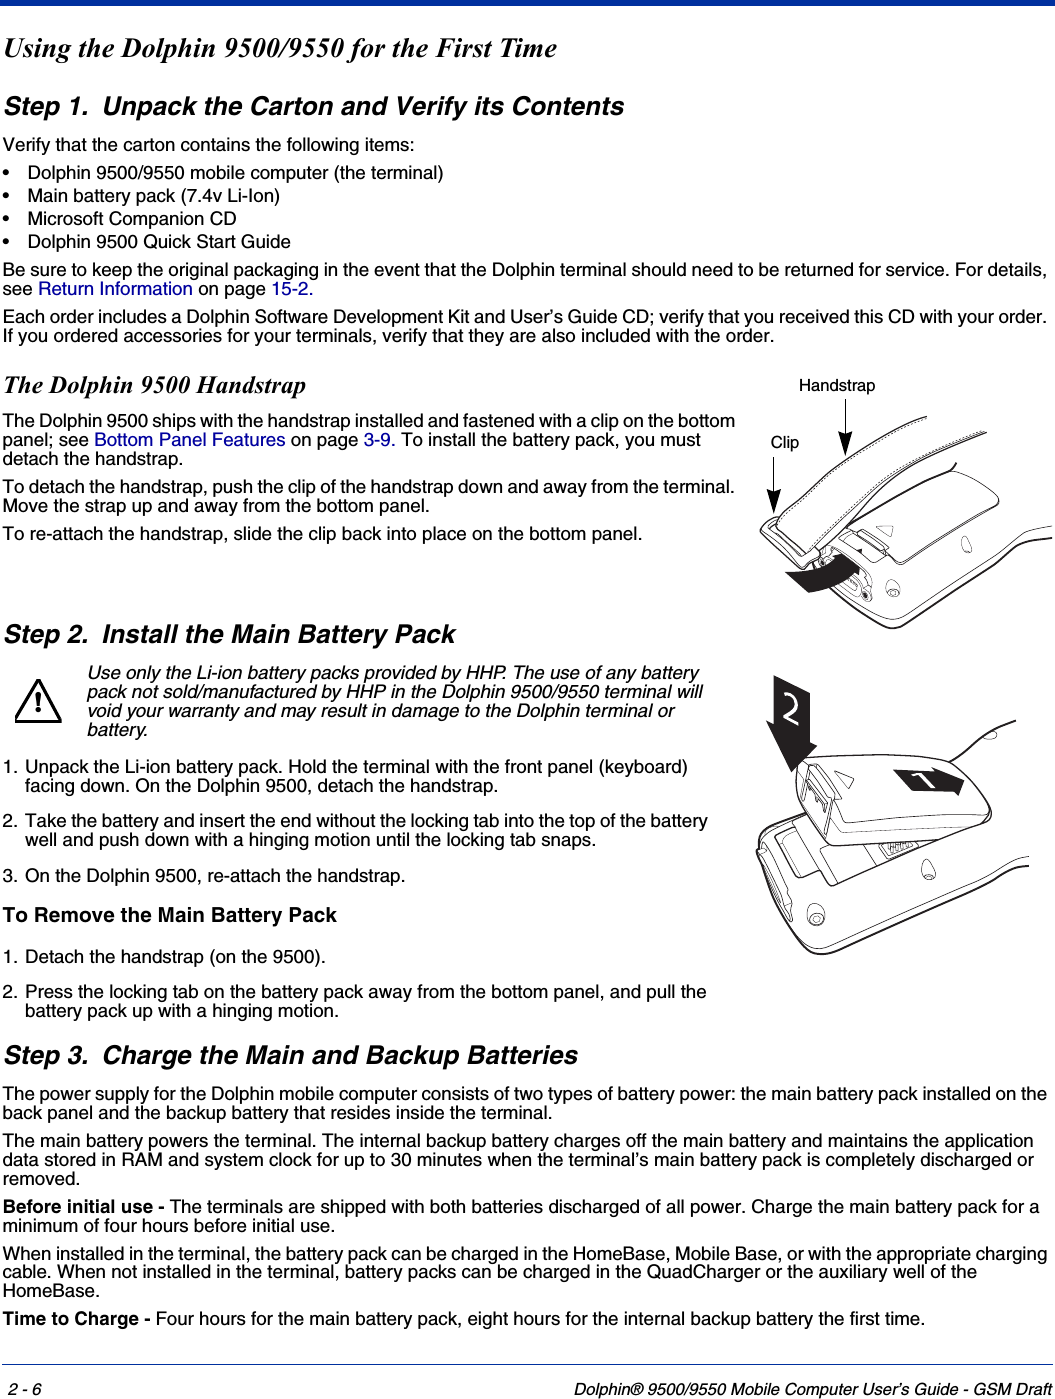 2 - 6 Dolphin® 9500/9550 Mobile Computer User’s Guide - GSM DraftUsing the Dolphin 9500/9550 for the First TimeStep 1. Unpack the Carton and Verify its ContentsVerify that the carton contains the following items: • Dolphin 9500/9550 mobile computer (the terminal)• Main battery pack (7.4v Li-Ion)• Microsoft Companion CD• Dolphin 9500 Quick Start GuideBe sure to keep the original packaging in the event that the Dolphin terminal should need to be returned for service. For details, see Return Information on page 15-2. Each order includes a Dolphin Software Development Kit and User’s Guide CD; verify that you received this CD with your order. If you ordered accessories for your terminals, verify that they are also included with the order.The Dolphin 9500 HandstrapThe Dolphin 9500 ships with the handstrap installed and fastened with a clip on the bottom panel; see Bottom Panel Features on page 3-9. To install the battery pack, you must detach the handstrap.To detach the handstrap, push the clip of the handstrap down and away from the terminal. Move the strap up and away from the bottom panel.To re-attach the handstrap, slide the clip back into place on the bottom panel.Step 2. Install the Main Battery PackUse only the Li-ion battery packs provided by HHP. The use of any battery pack not sold/manufactured by HHP in the Dolphin 9500/9550 terminal will void your warranty and may result in damage to the Dolphin terminal or battery. 1. Unpack the Li-ion battery pack. Hold the terminal with the front panel (keyboard) facing down. On the Dolphin 9500, detach the handstrap.2. Take the battery and insert the end without the locking tab into the top of the battery well and push down with a hinging motion until the locking tab snaps. 3. On the Dolphin 9500, re-attach the handstrap. To Remove the Main Battery Pack 1. Detach the handstrap (on the 9500).2. Press the locking tab on the battery pack away from the bottom panel, and pull the battery pack up with a hinging motion.Step 3. Charge the Main and Backup BatteriesThe power supply for the Dolphin mobile computer consists of two types of battery power: the main battery pack installed on the back panel and the backup battery that resides inside the terminal. The main battery powers the terminal. The internal backup battery charges off the main battery and maintains the application data stored in RAM and system clock for up to 30 minutes when the terminal’s main battery pack is completely discharged or removed. Before initial use - The terminals are shipped with both batteries discharged of all power. Charge the main battery pack for a minimum of four hours before initial use. When installed in the terminal, the battery pack can be charged in the HomeBase, Mobile Base, or with the appropriate charging cable. When not installed in the terminal, battery packs can be charged in the QuadCharger or the auxiliary well of the HomeBase.Time to Charge - Four hours for the main battery pack, eight hours for the internal backup battery the first time.ClipHandstrap!